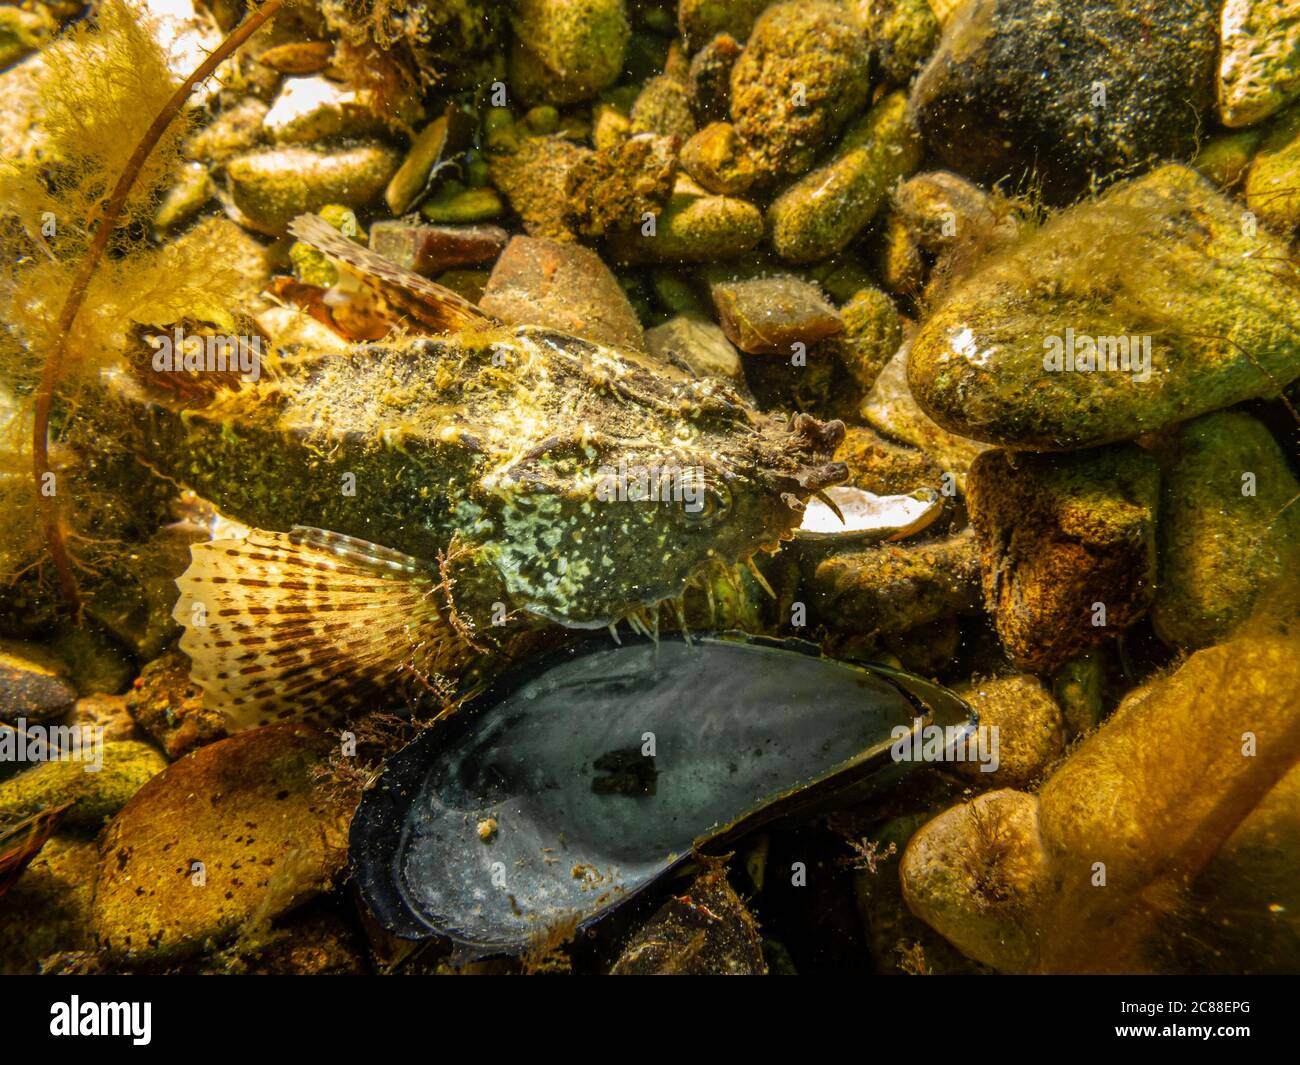 A closeup picture of an Agonus cataphractus, commonly known as the hooknose, pogge, or armed bullhead. Picture from a seascape in Oresund, Malmo southern Sweden Stock Photo